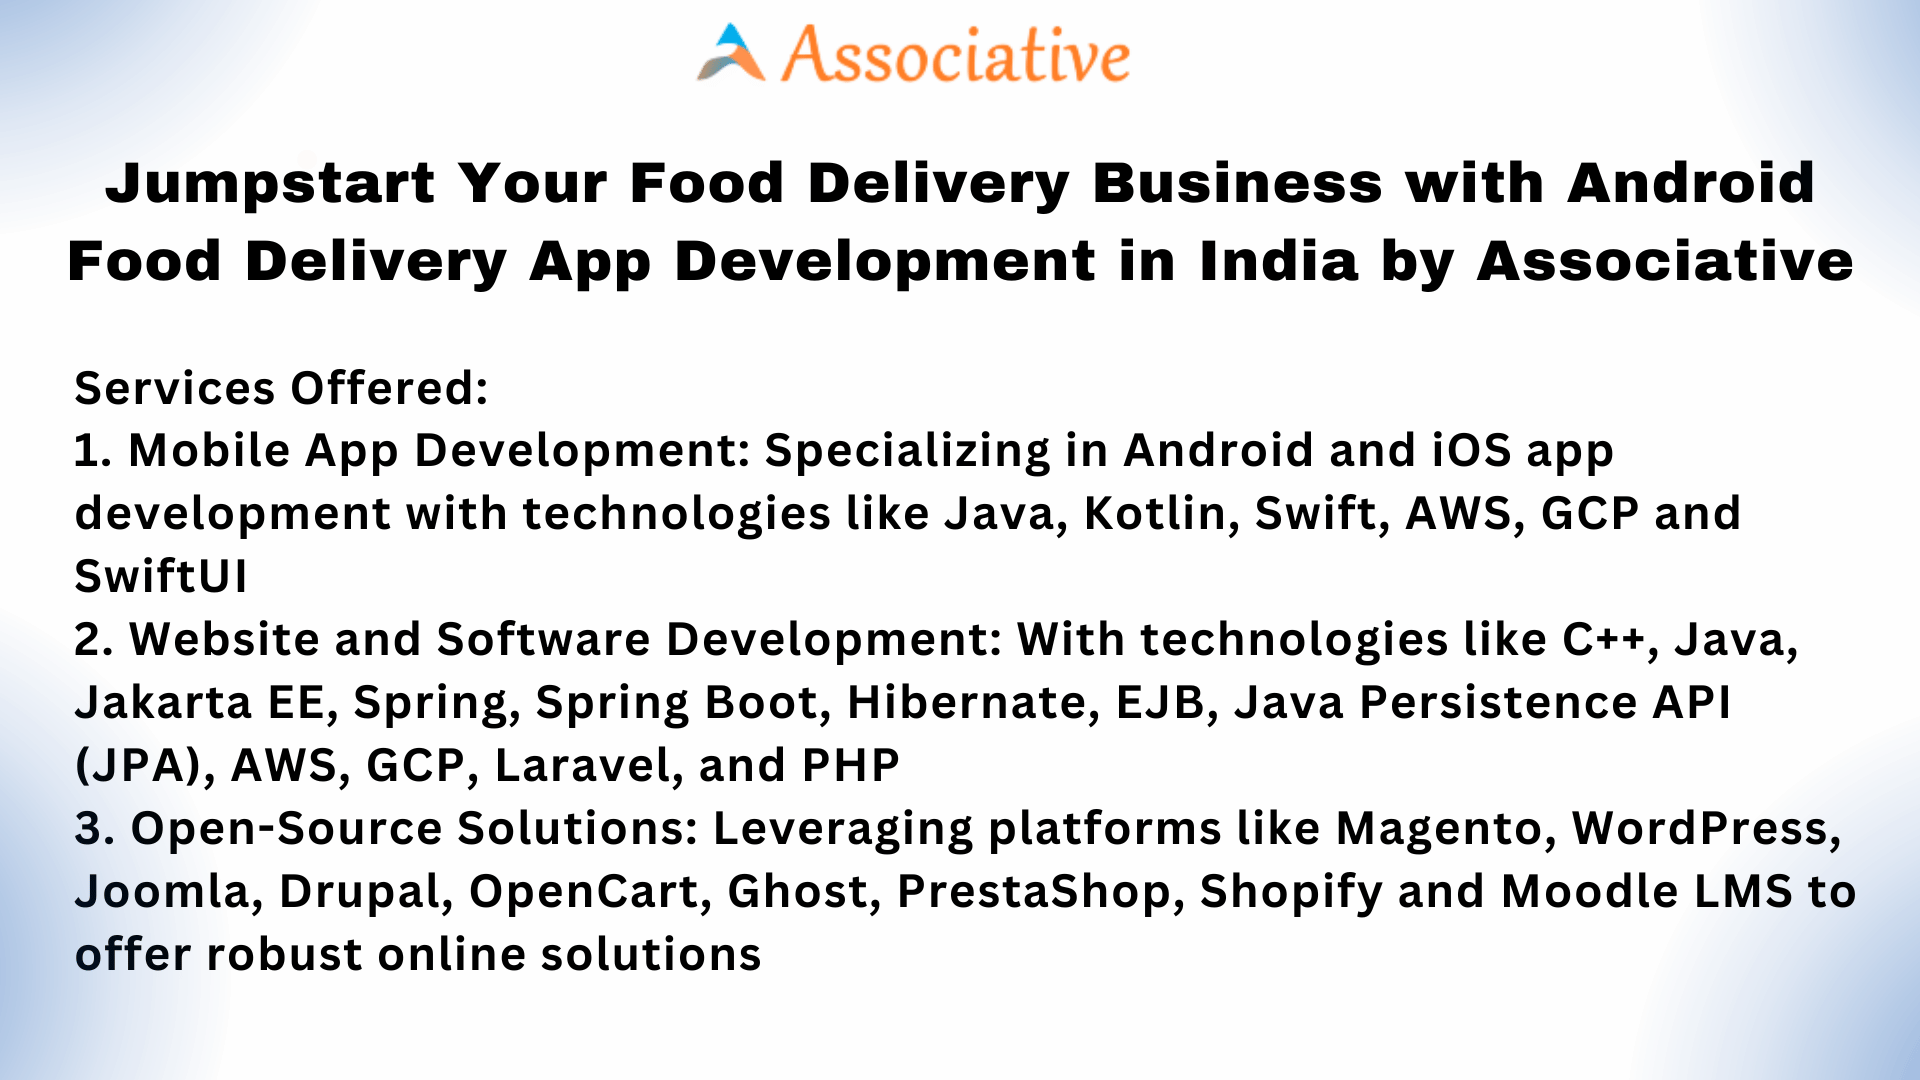 Jumpstart Your Food Delivery Business with Android Food Delivery App Development in India by Associative